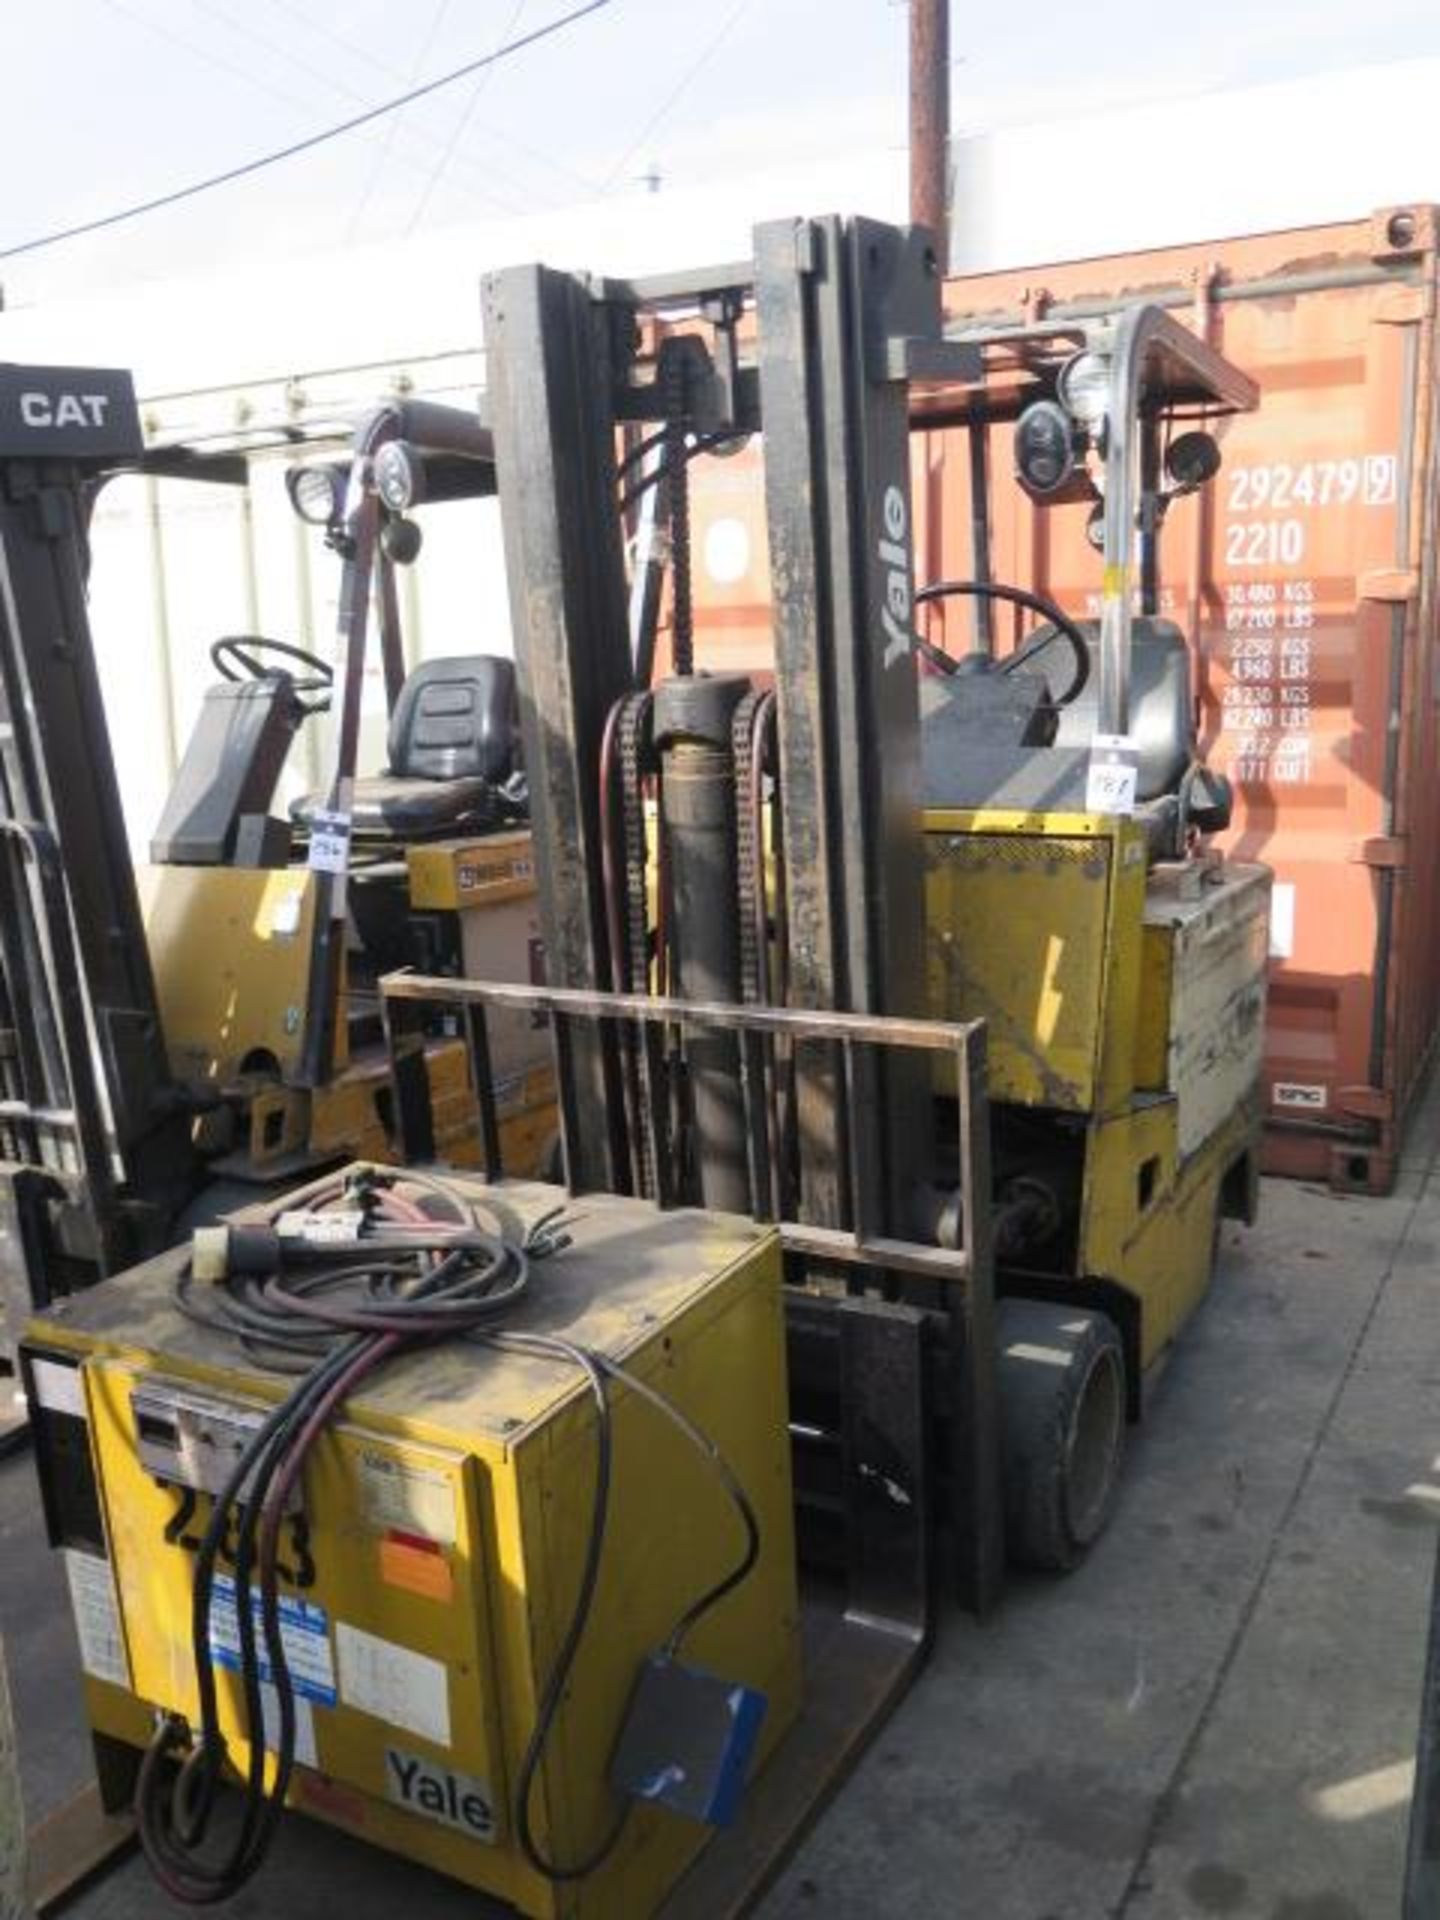 Yale ERC050FBN48ST083 3000 Lb Cap Electric Forklift s/n N365816 w/ 3-Stage Mast, 192” Lift Height, - Image 2 of 9